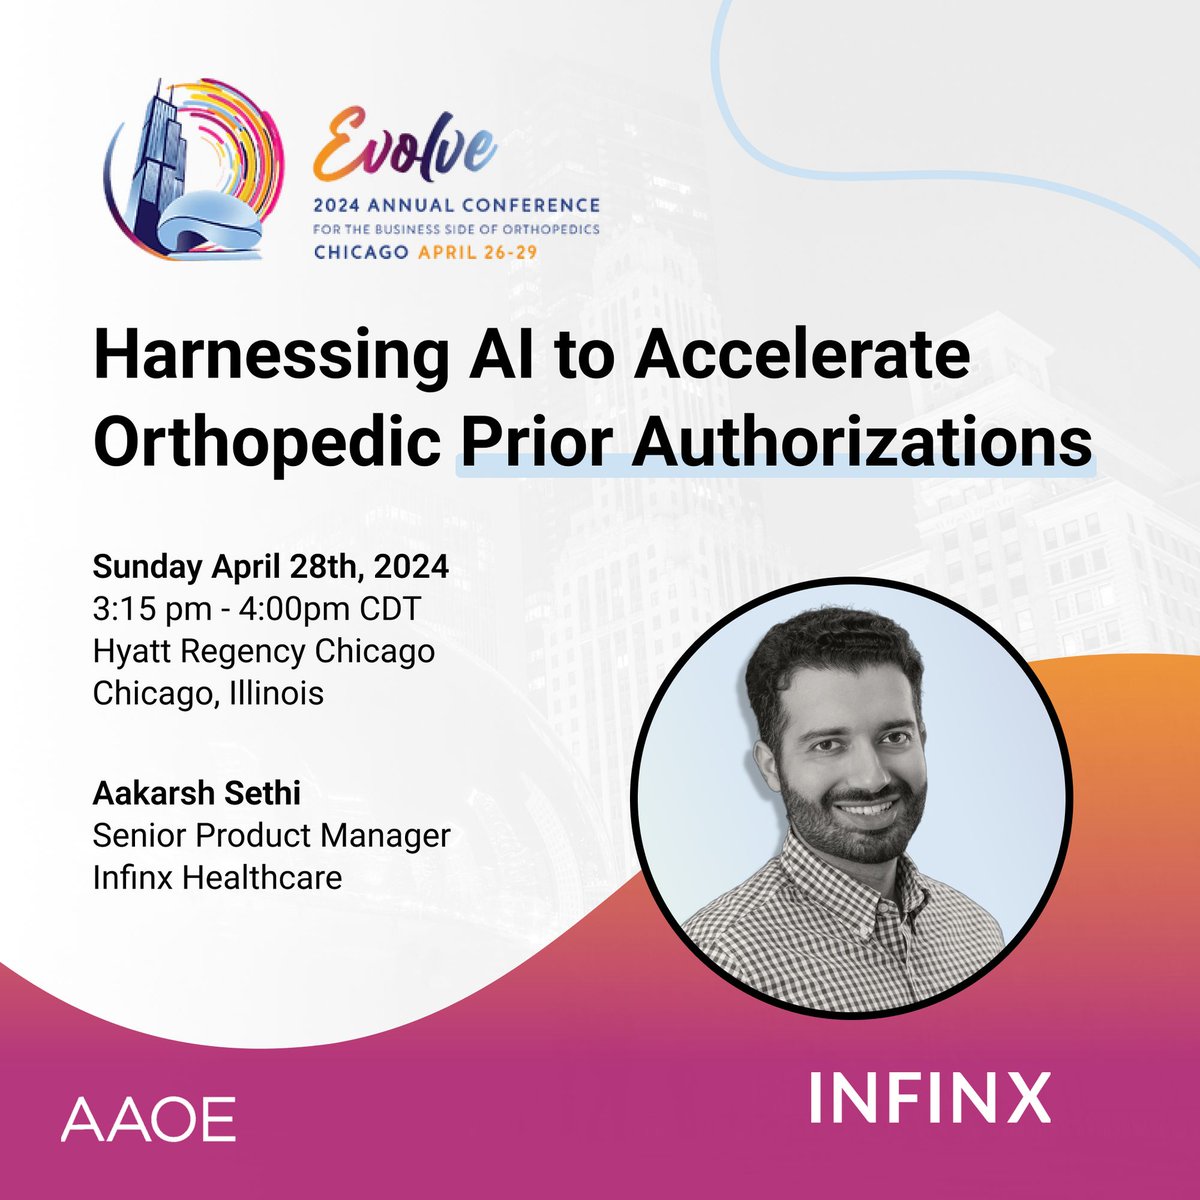 If you’re going to the AAOE Conference, join Aakarsh Seth, our Senior Product Manager for “Harnessing AI to Accelerate Orthopedic Prior Authorizations.” hubs.li/Q02sqZVb0 #AAOEConference2024 #AAOE #OrthopedicRCM #OrthopedicPriorAuthorization #RCMAutomation